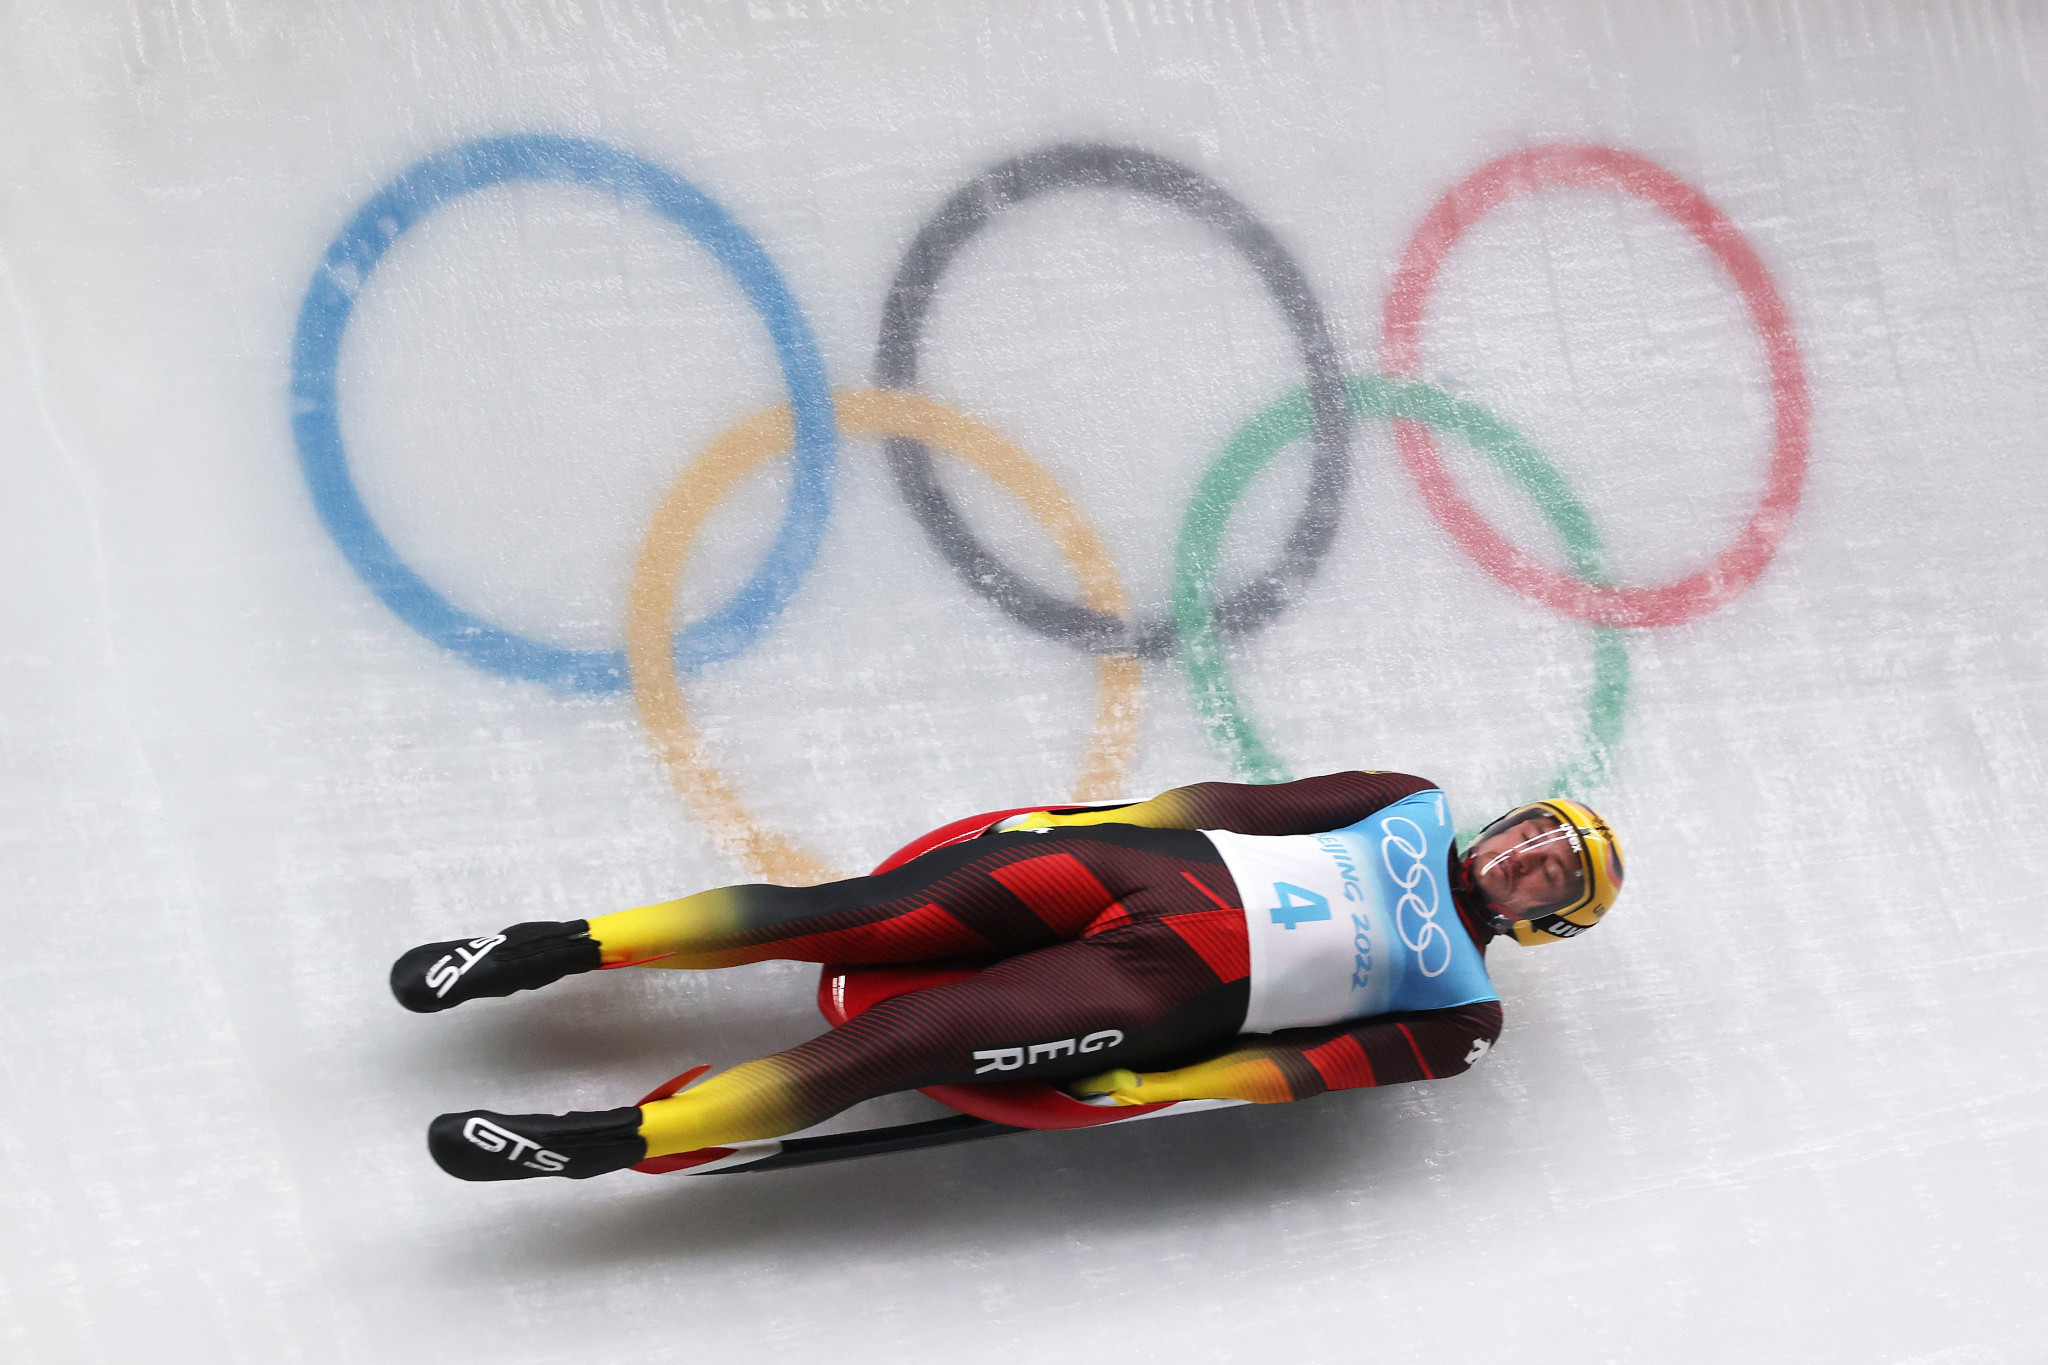 Johannes Ludwig also met Germany's lofty expectations, leading from start to finish to claim the men's singles gold medal after finishing third at Pyeongchang 2018 ©Getty Images